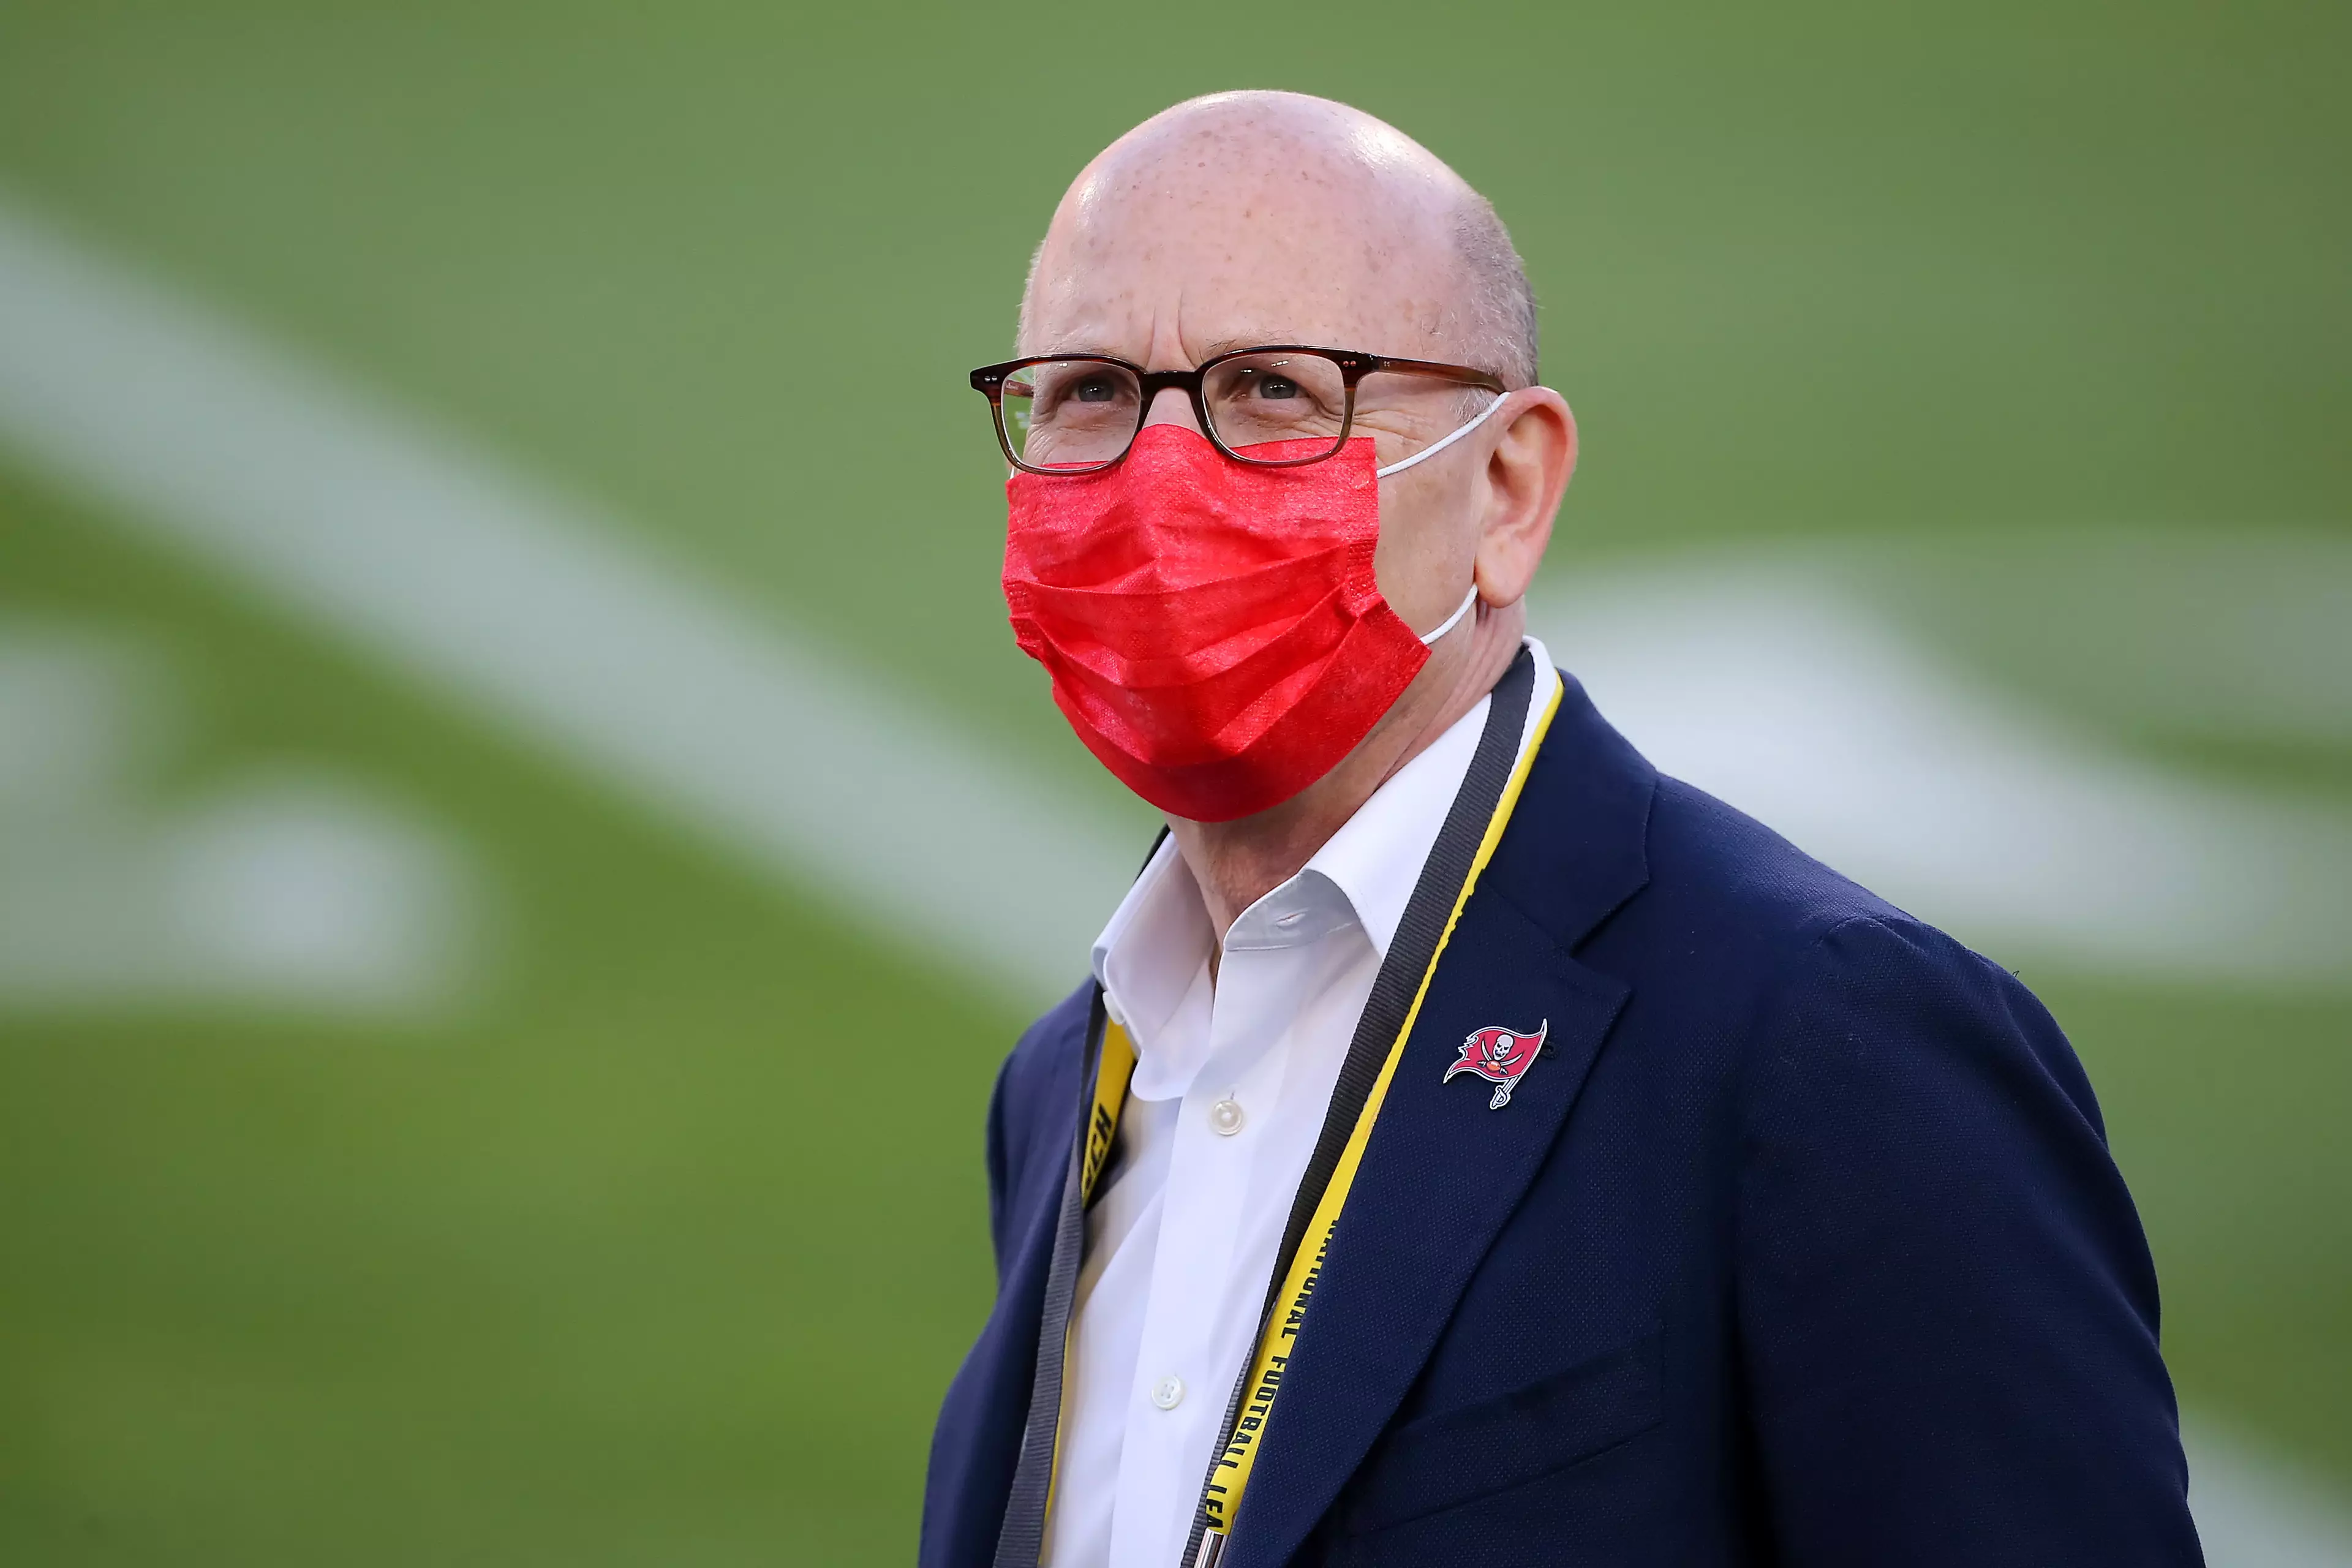 The Glazers have been very quiet throughout their ownership. Image: PA Images